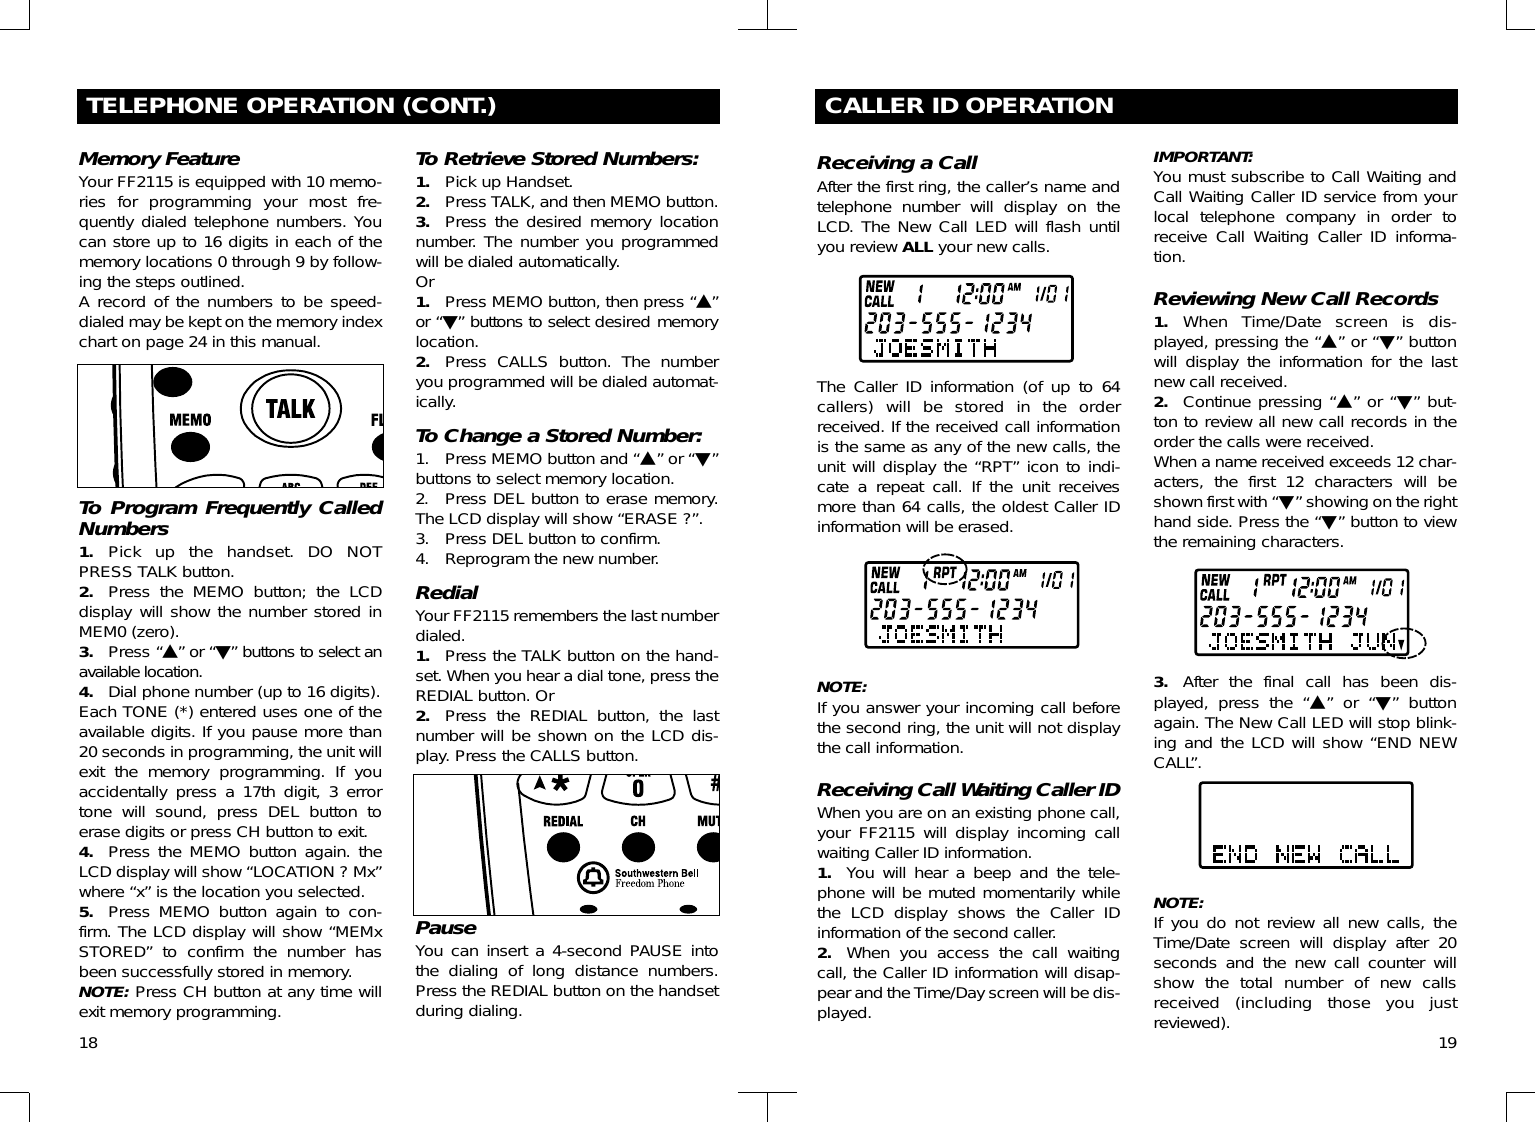 18TELEPHONE OPERATION (CONT.)Memory FeatureYour FF2115 is equipped with 10 memo-ries for programming your most fre-quently dialed telephone numbers. Youcan store up to 16 digits in each of thememory locations 0 through 9 by follow-ing the steps outlined.A record of the numbers to be speed-dialed may be kept on the memory indexchart on page 24 in this manual. To Program Frequently CalledNumbers 1. Pick up the handset. DO NOTPRESS TALK button.2. Press the MEMO button; the LCDdisplay will show the number stored inMEM0 (zero).3. Press “!” or “&quot;” buttons to select anavailable location.4. Dial phone number (up to 16 digits). Each TONE (*) entered uses one of theavailable digits. If you pause more than20 seconds in programming, the unit willexit the memory programming. If youaccidentally press a 17th digit, 3 errortone will sound, press DEL button toerase digits or press CH button to exit.4. Press the MEMO button again. theLCD display will show “LOCATION ? Mx”where “x” is the location you selected.5. Press MEMO button again to con-firm. The LCD display will show “MEMxSTORED” to confirm the number hasbeen successfully stored in memory.NOTE: Press CH button at any time willexit memory programming.To Retrieve Stored Numbers:1. Pick up Handset.2. Press TALK, and then MEMO button.3. Press the desired memory locationnumber. The number you programmedwill be dialed automatically.Or1. Press MEMO button, then press “!”or “&quot;” buttons to select desired memorylocation.2. Press CALLS button. The numberyou programmed will be dialed automat-ically.To Change a Stored Number:1. Press MEMO button and “!” or “&quot;”buttons to select memory location.2. Press DEL button to erase memory.The LCD display will show “ERASE ?”.3. Press DEL button to confirm.4. Reprogram the new number.RedialYour FF2115 remembers the last numberdialed. 1. Press the TALK button on the hand-set. When you hear a dial tone, press theREDIAL button. Or2. Press the REDIAL button, the lastnumber will be shown on the LCD dis-play. Press the CALLS button.PauseYou can insert a 4-second PAUSE intothe dialing of long distance numbers.Press the REDIAL button on the handsetduring dialing.CALLER ID OPERATIONReceiving a CallAfter the first ring, the caller’s name andtelephone number will display on theLCD. The New Call LED will flash untilyou review ALL your new calls.The Caller ID information (of up to 64callers) will be stored in the orderreceived. If the received call informationis the same as any of the new calls, theunit will display the “RPT” icon to indi-cate a repeat call. If the unit receivesmore than 64 calls, the oldest Caller IDinformation will be erased.NOTE:If you answer your incoming call beforethe second ring, the unit will not displaythe call information.Receiving Call Waiting Caller IDWhen you are on an existing phone call,your FF2115 will display incoming callwaiting Caller ID information.1. You will hear a beep and the tele-phone will be muted momentarily whilethe LCD display shows the Caller IDinformation of the second caller.2. When you access the call waitingcall, the Caller ID information will disap-pear and the Time/Day screen will be dis-played.IMPORTANT:You must subscribe to Call Waiting andCall Waiting Caller ID service from yourlocal telephone company in order toreceive Call Waiting Caller ID informa-tion.Reviewing New Call Records1. When Time/Date screen is dis-played, pressing the “!” or “&quot;” buttonwill display the information for the lastnew call received.2. Continue pressing “!” or “&quot;” but-ton to review all new call records in theorder the calls were received.When a name received exceeds 12 char-acters, the first 12 characters will beshown first with “&quot;” showing on the righthand side. Press the “&quot;” button to viewthe remaining characters.3. After the final call has been dis-played, press the “!” or “&quot;” buttonagain. The New Call LED will stop blink-ing and the LCD will show “END NEWCALL”.NOTE:If you do not review all new calls, theTime/Date screen will display after 20seconds and the new call counter willshow the total number of new callsreceived (including those you justreviewed). 19